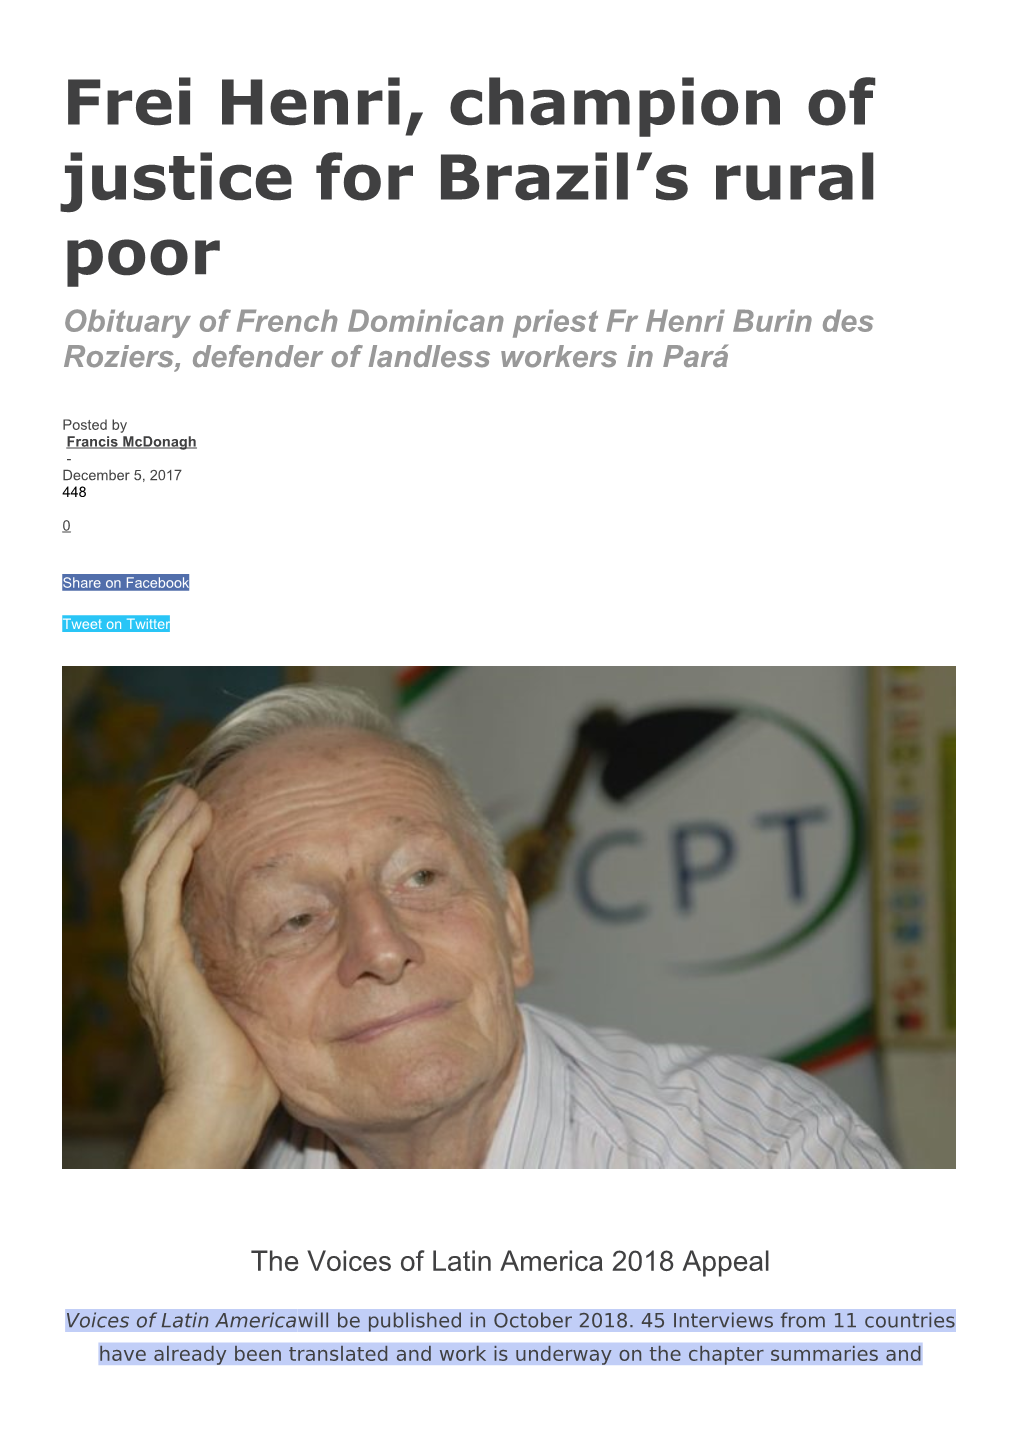 Frei Henri, Champion of Justice for Brazil's Rural Poor